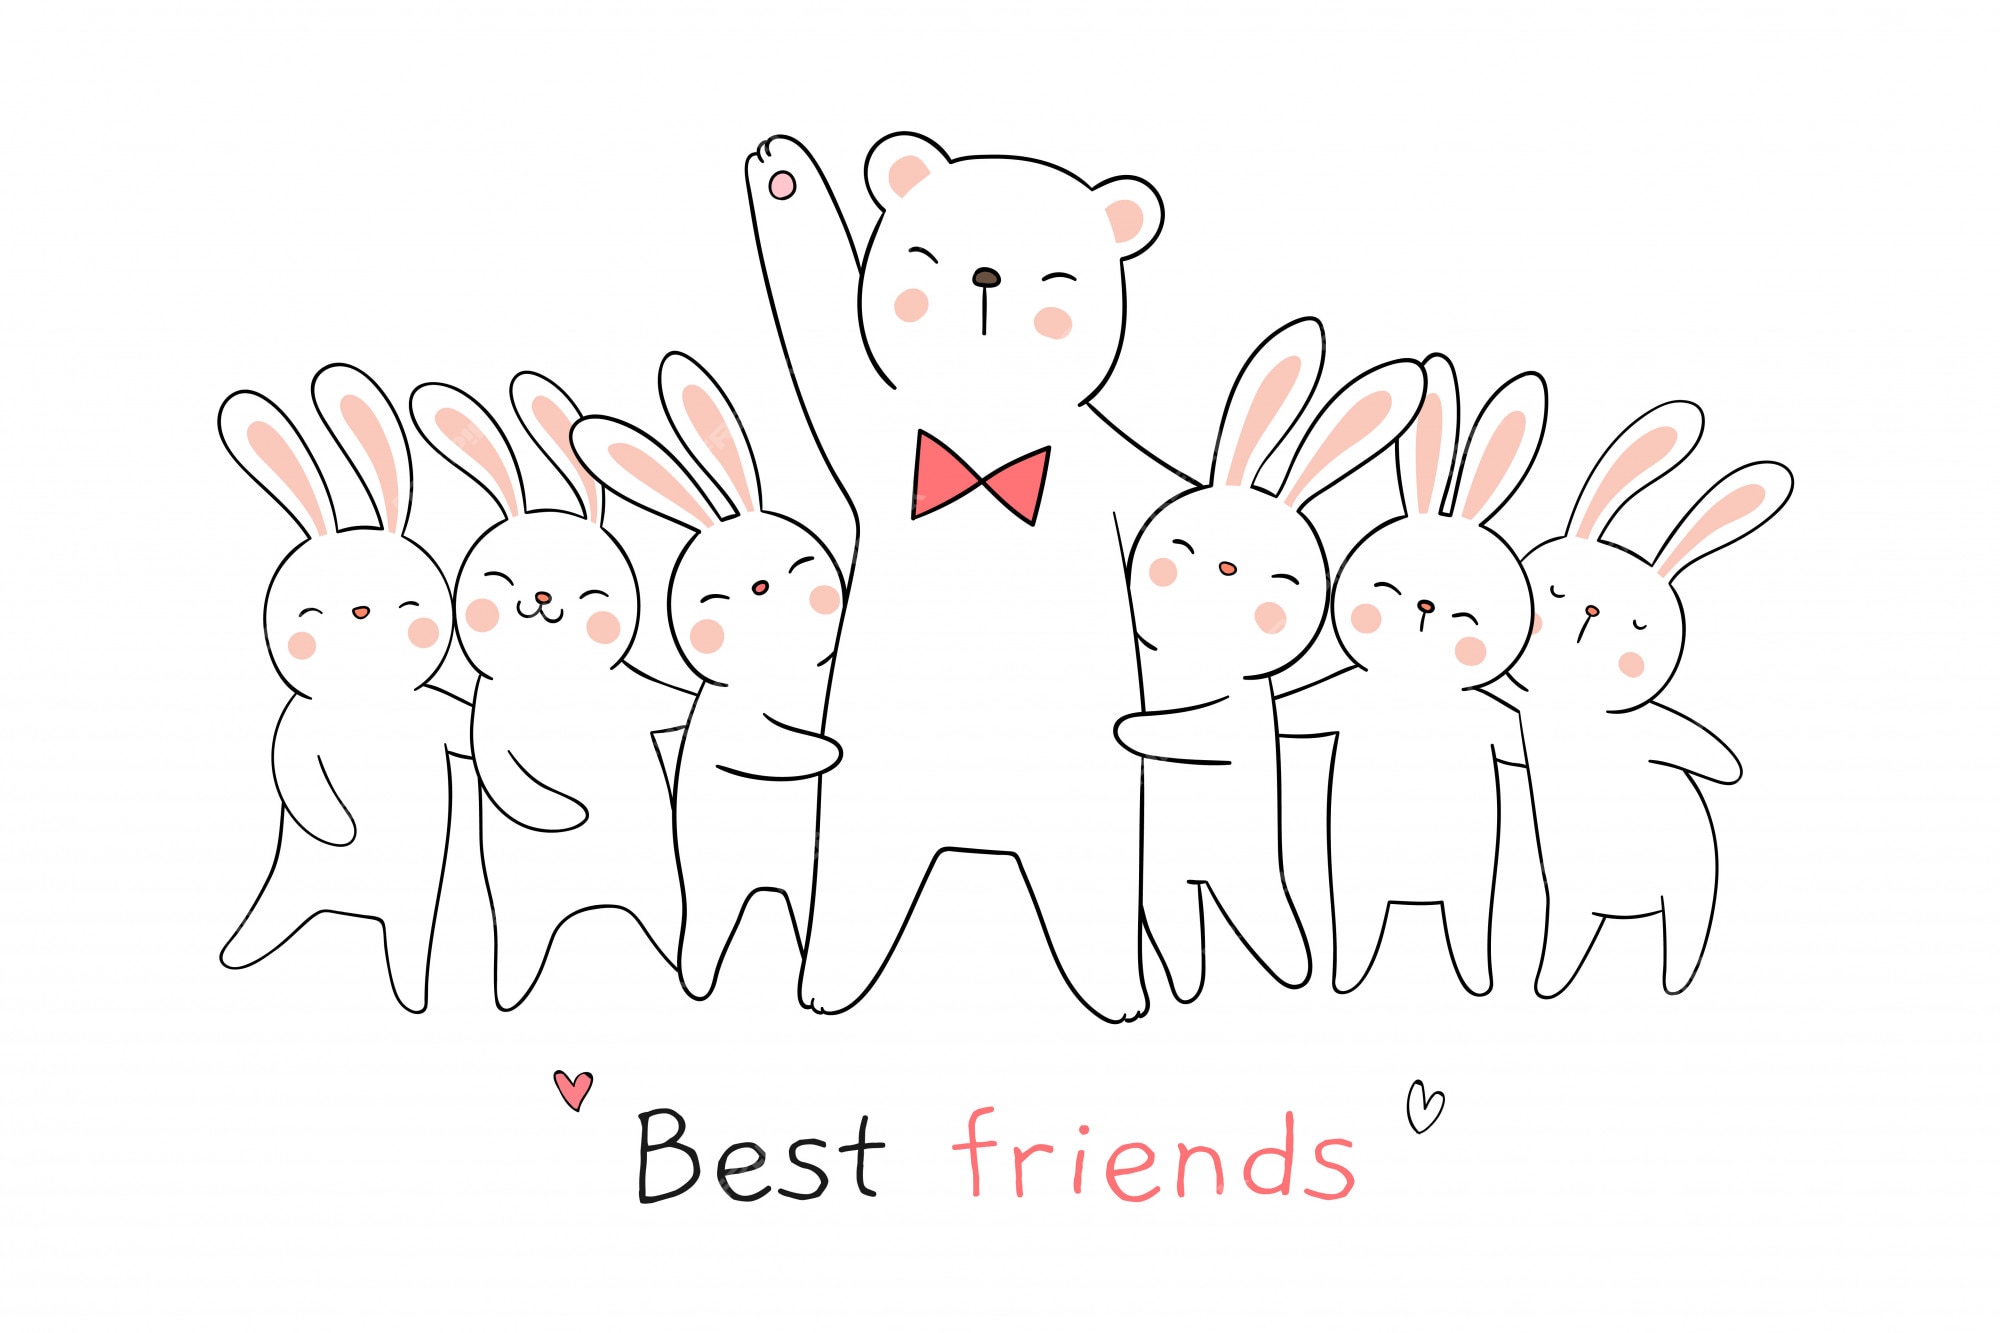 Best Friends ~ Hug By BRU Animated Picture Codes and Downloads  #129872441,798491124